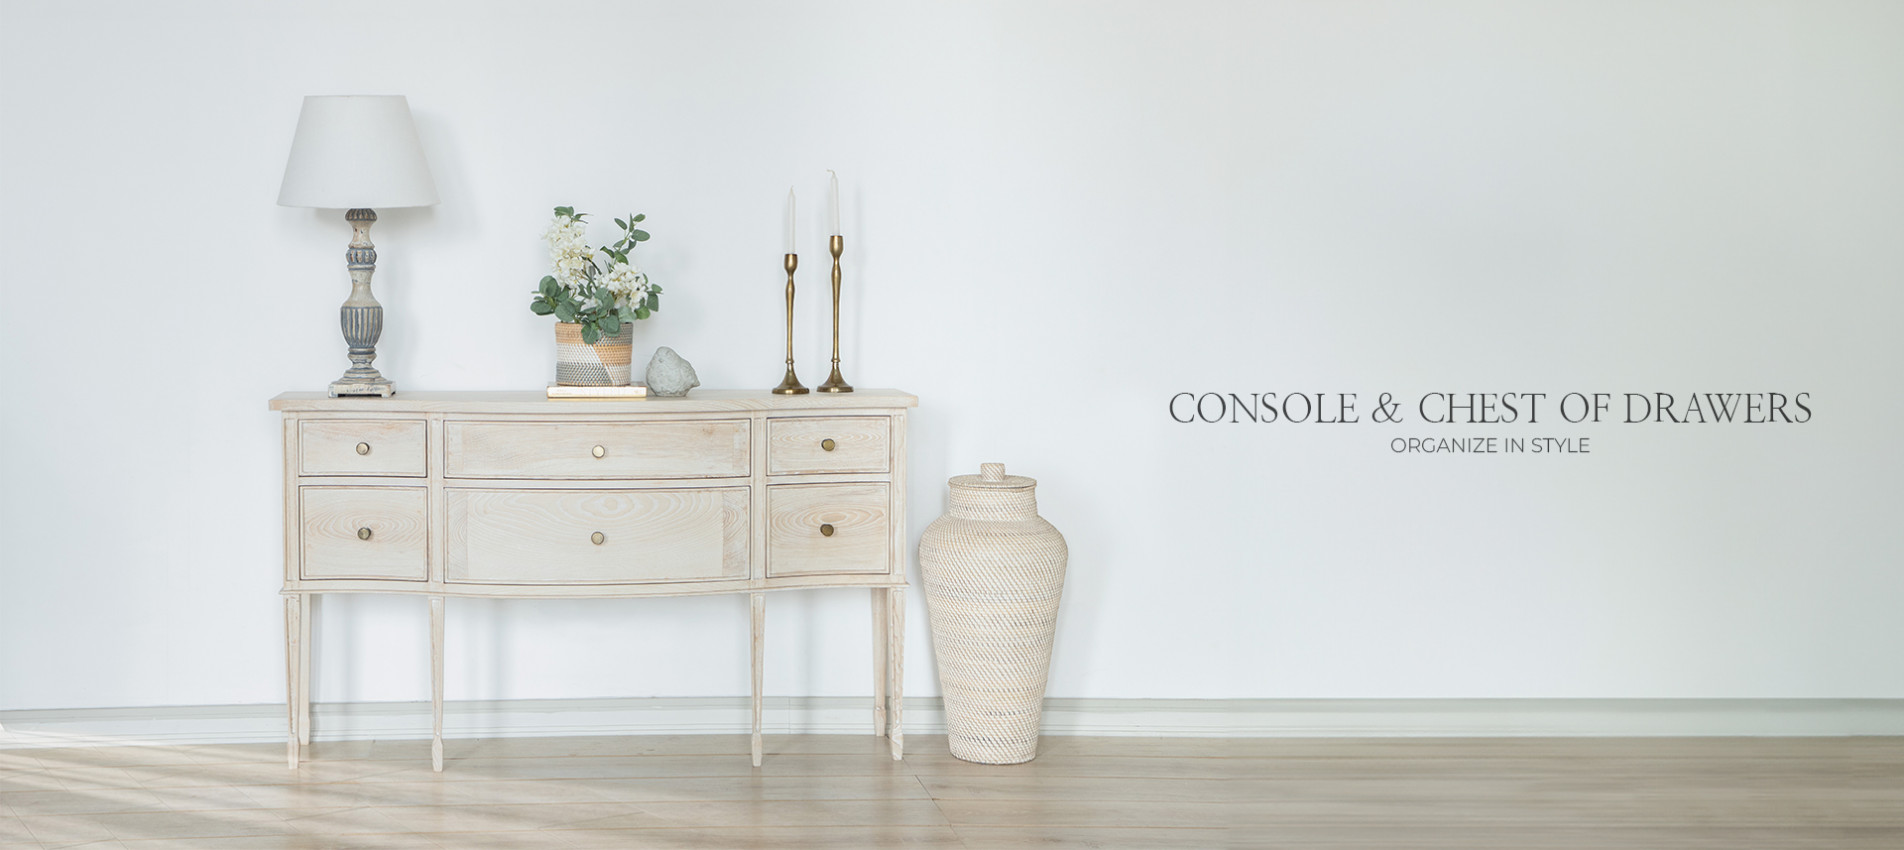 Consoles and Chest of Drawers